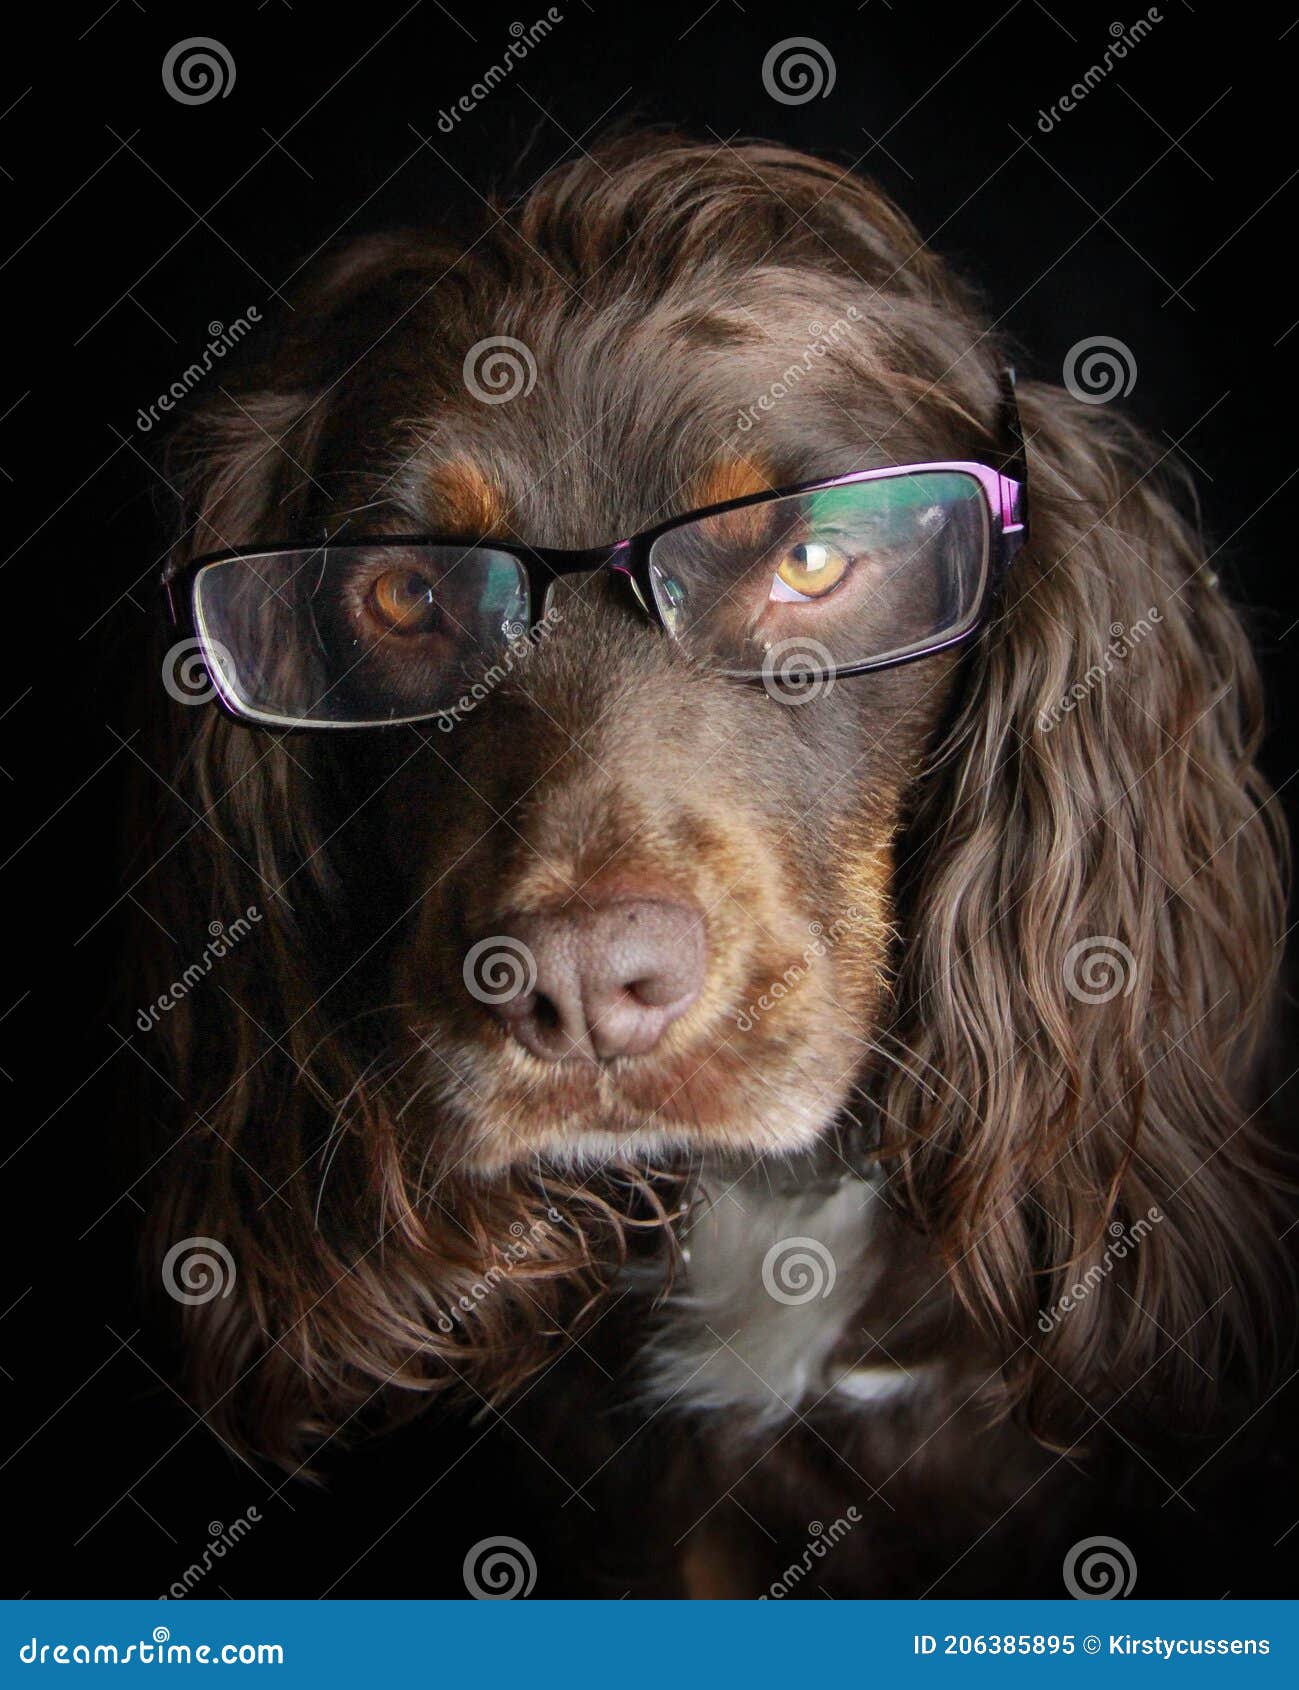 head shot of brown spaniel wearing glasses or spectaces against a black background